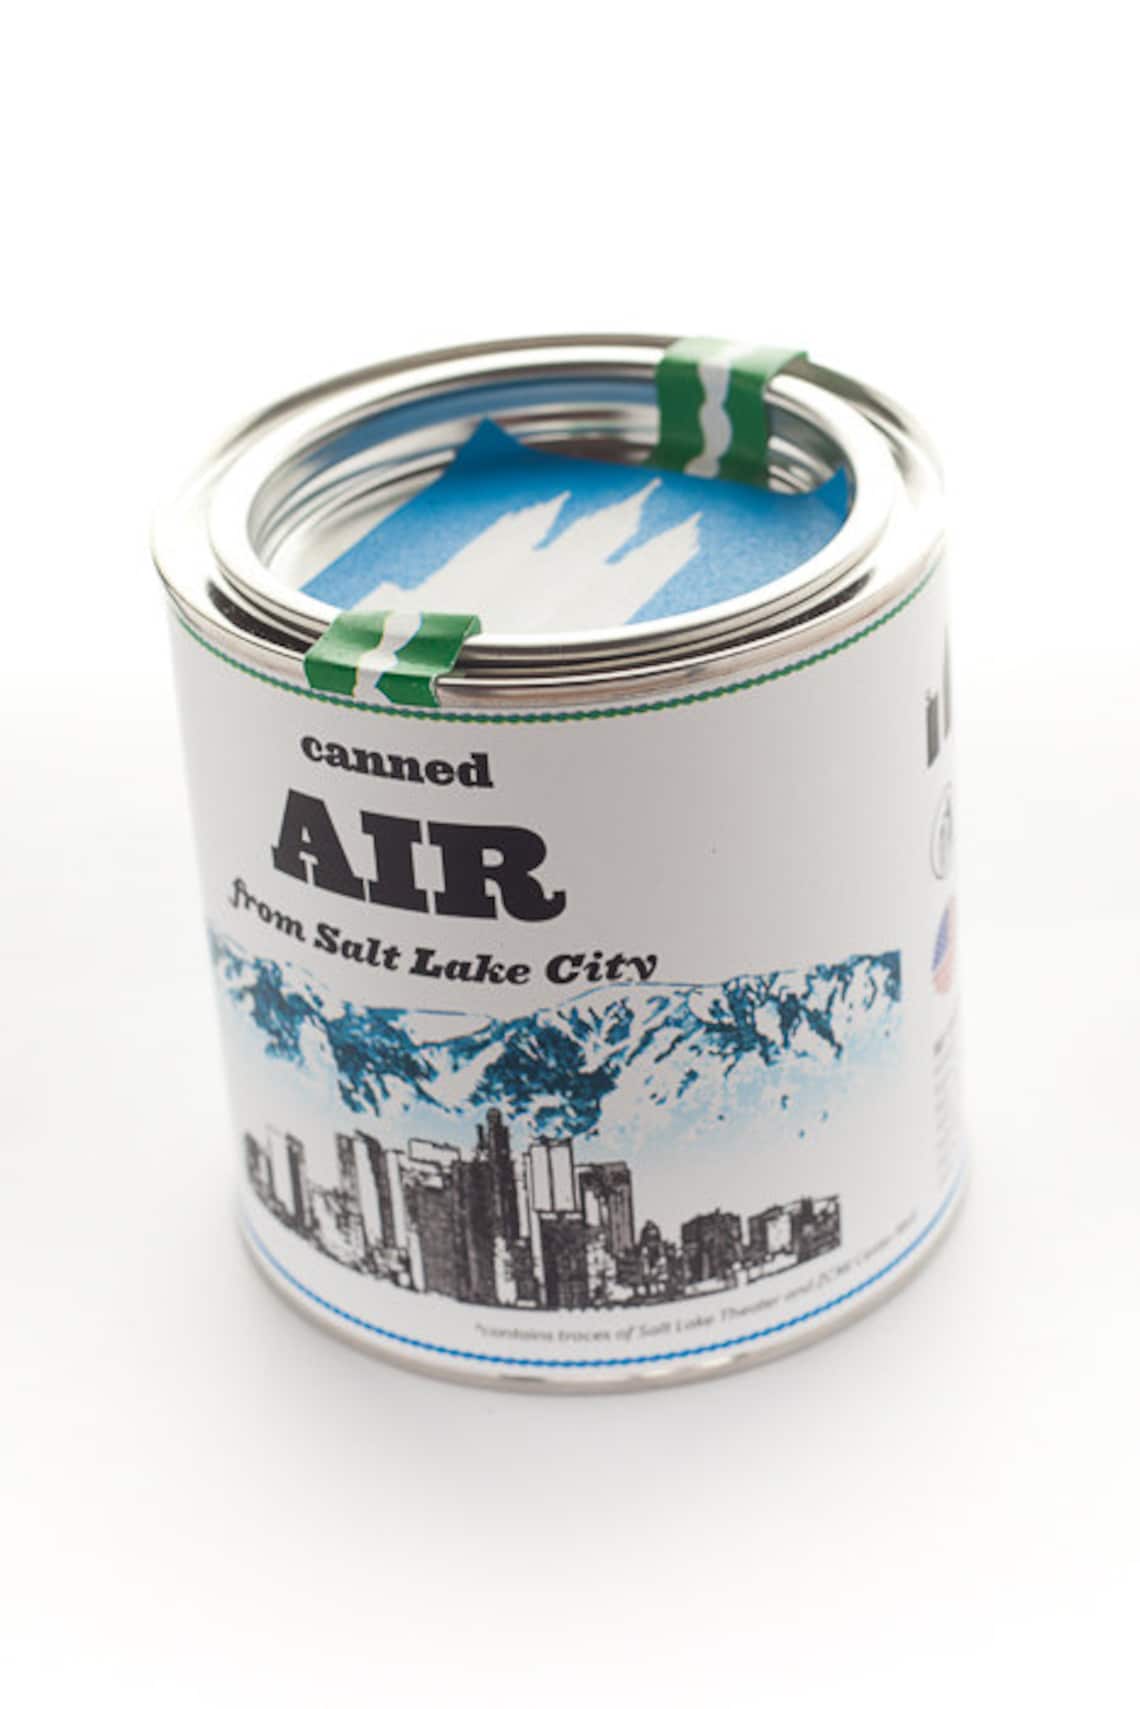 Original Canned Air From Salt Lake City | Etsy